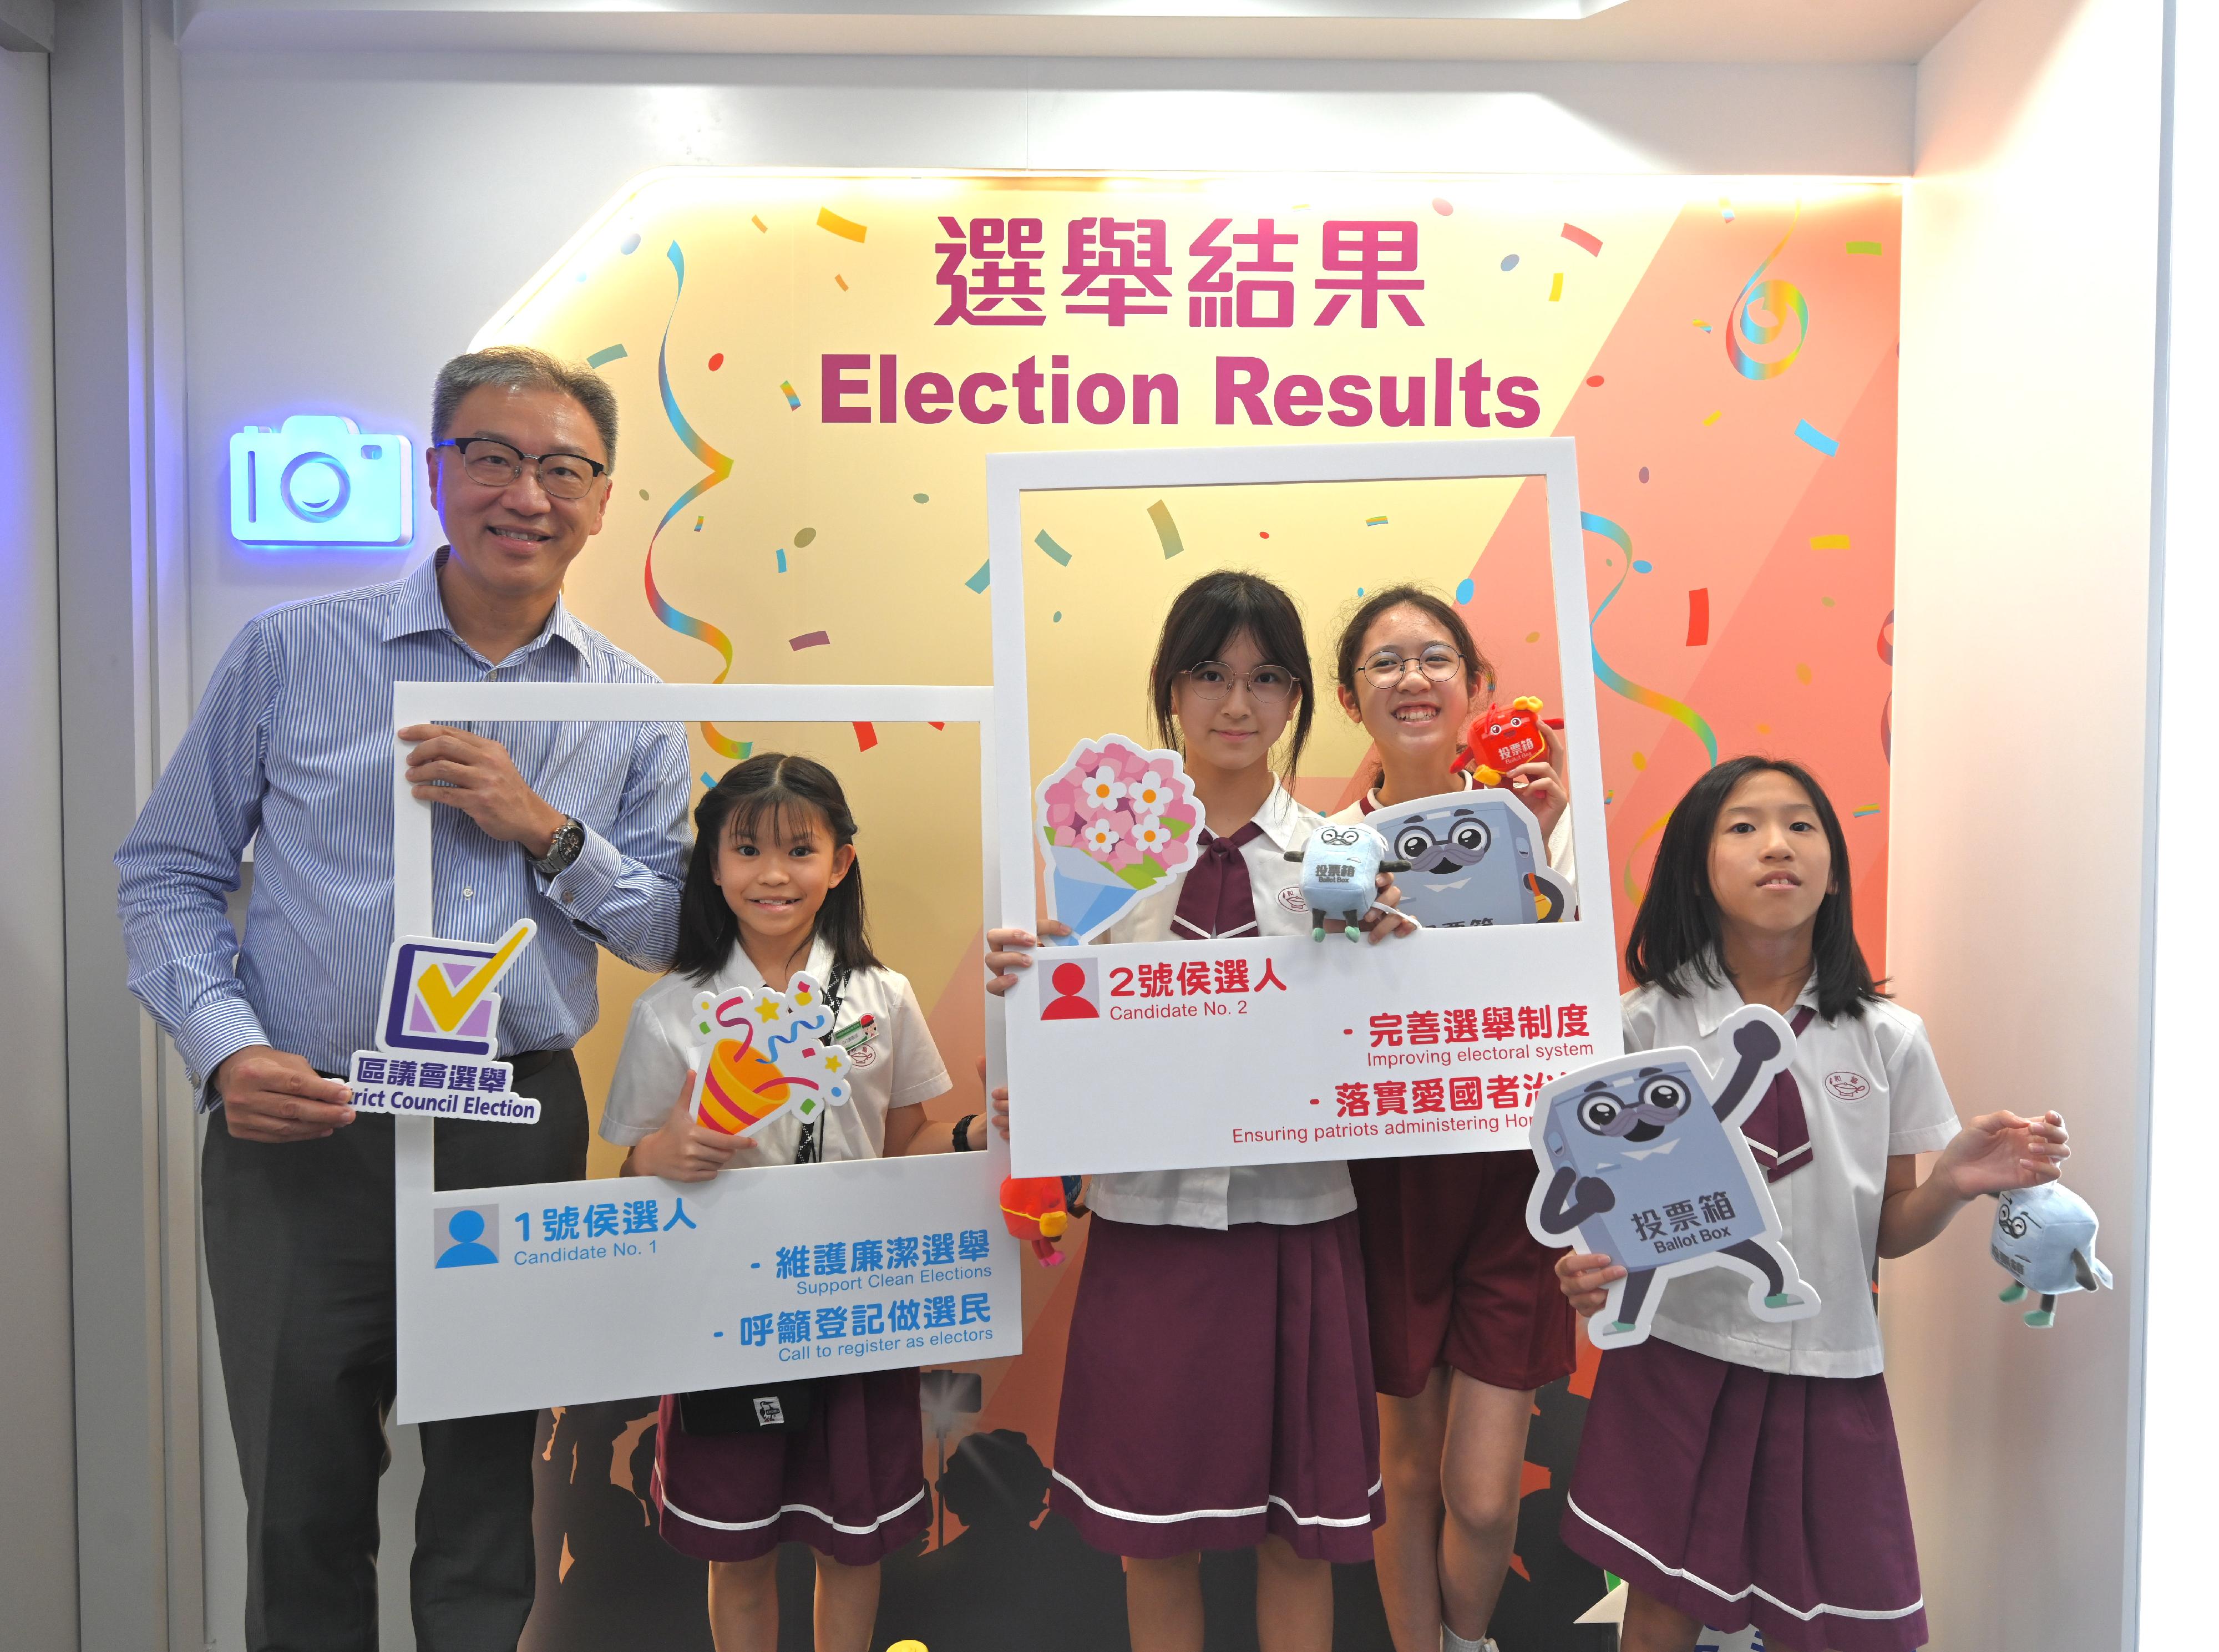 The brand new Electoral Information Centre of the Registration and Electoral Office today (October 24) officially came into operation with a new look at the new site located at the Treasury Building, Cheung Sha Wan. Photo shows the Chairman of the Electoral Affairs Commission, Mr Justice Lok, and the students at the photo area.